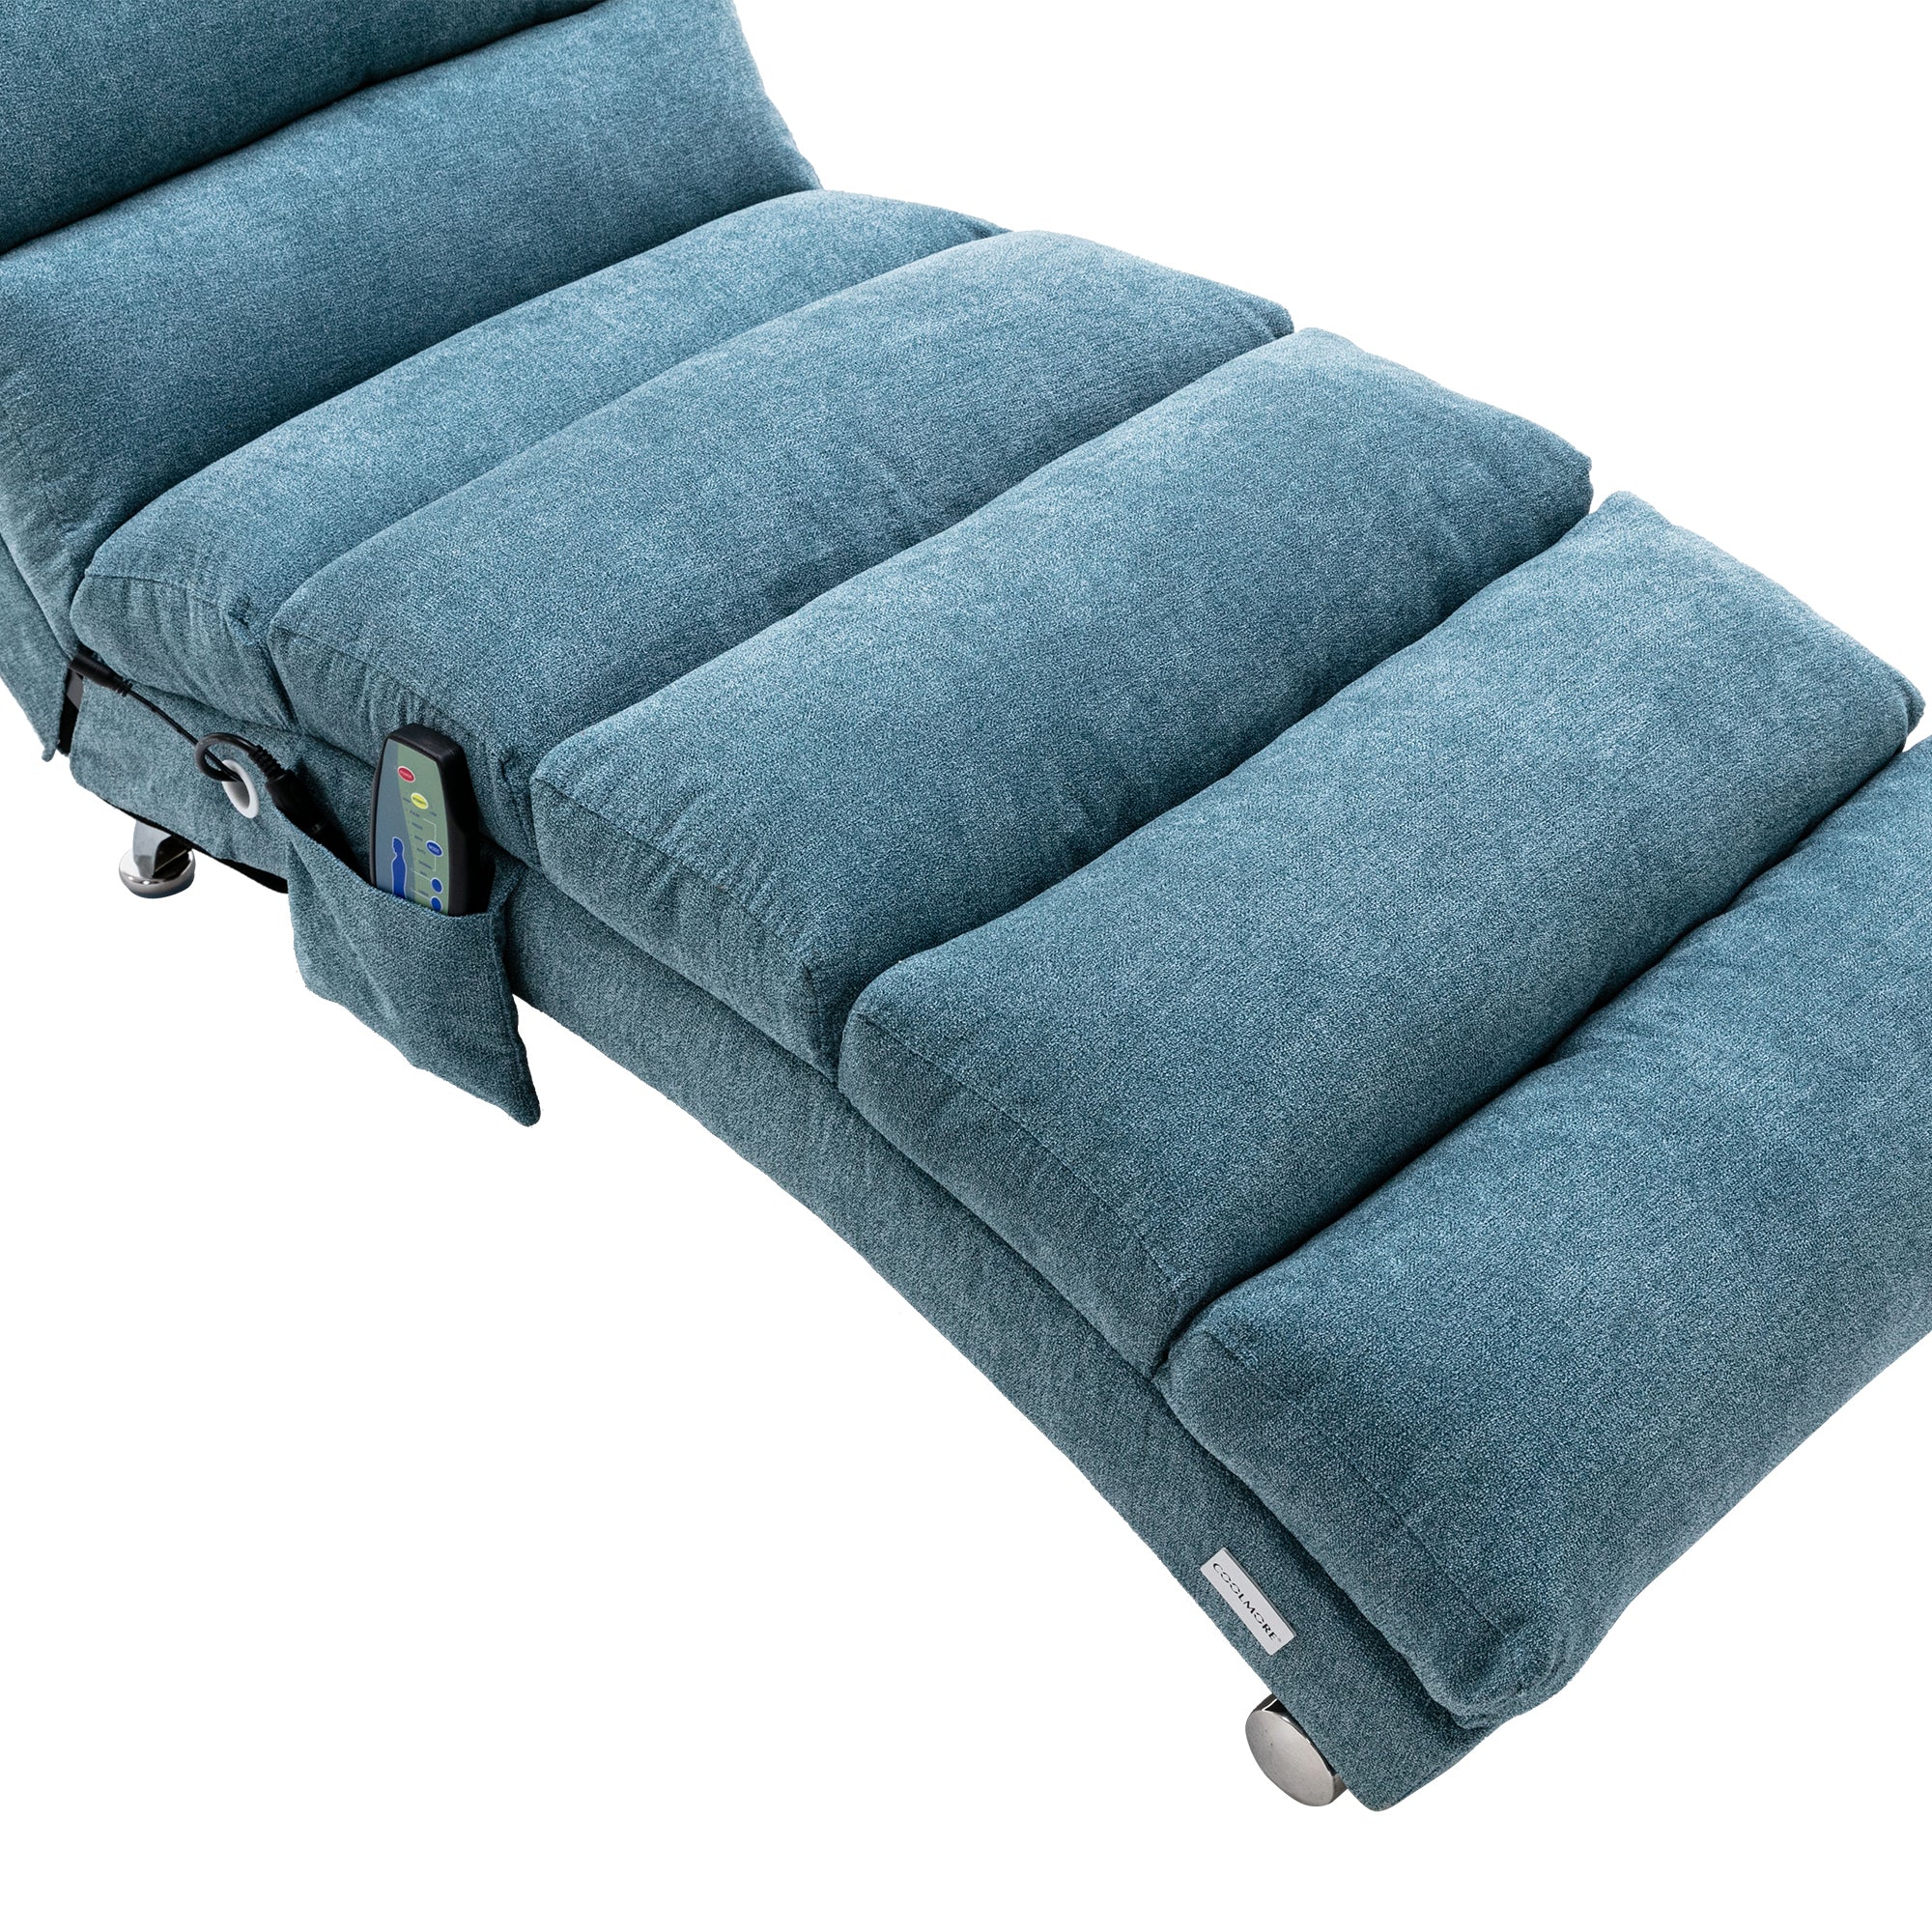 COOLMORE Linen Chaise Lounge Indoor Chair, Modern Long Lounger for Office or Living Room